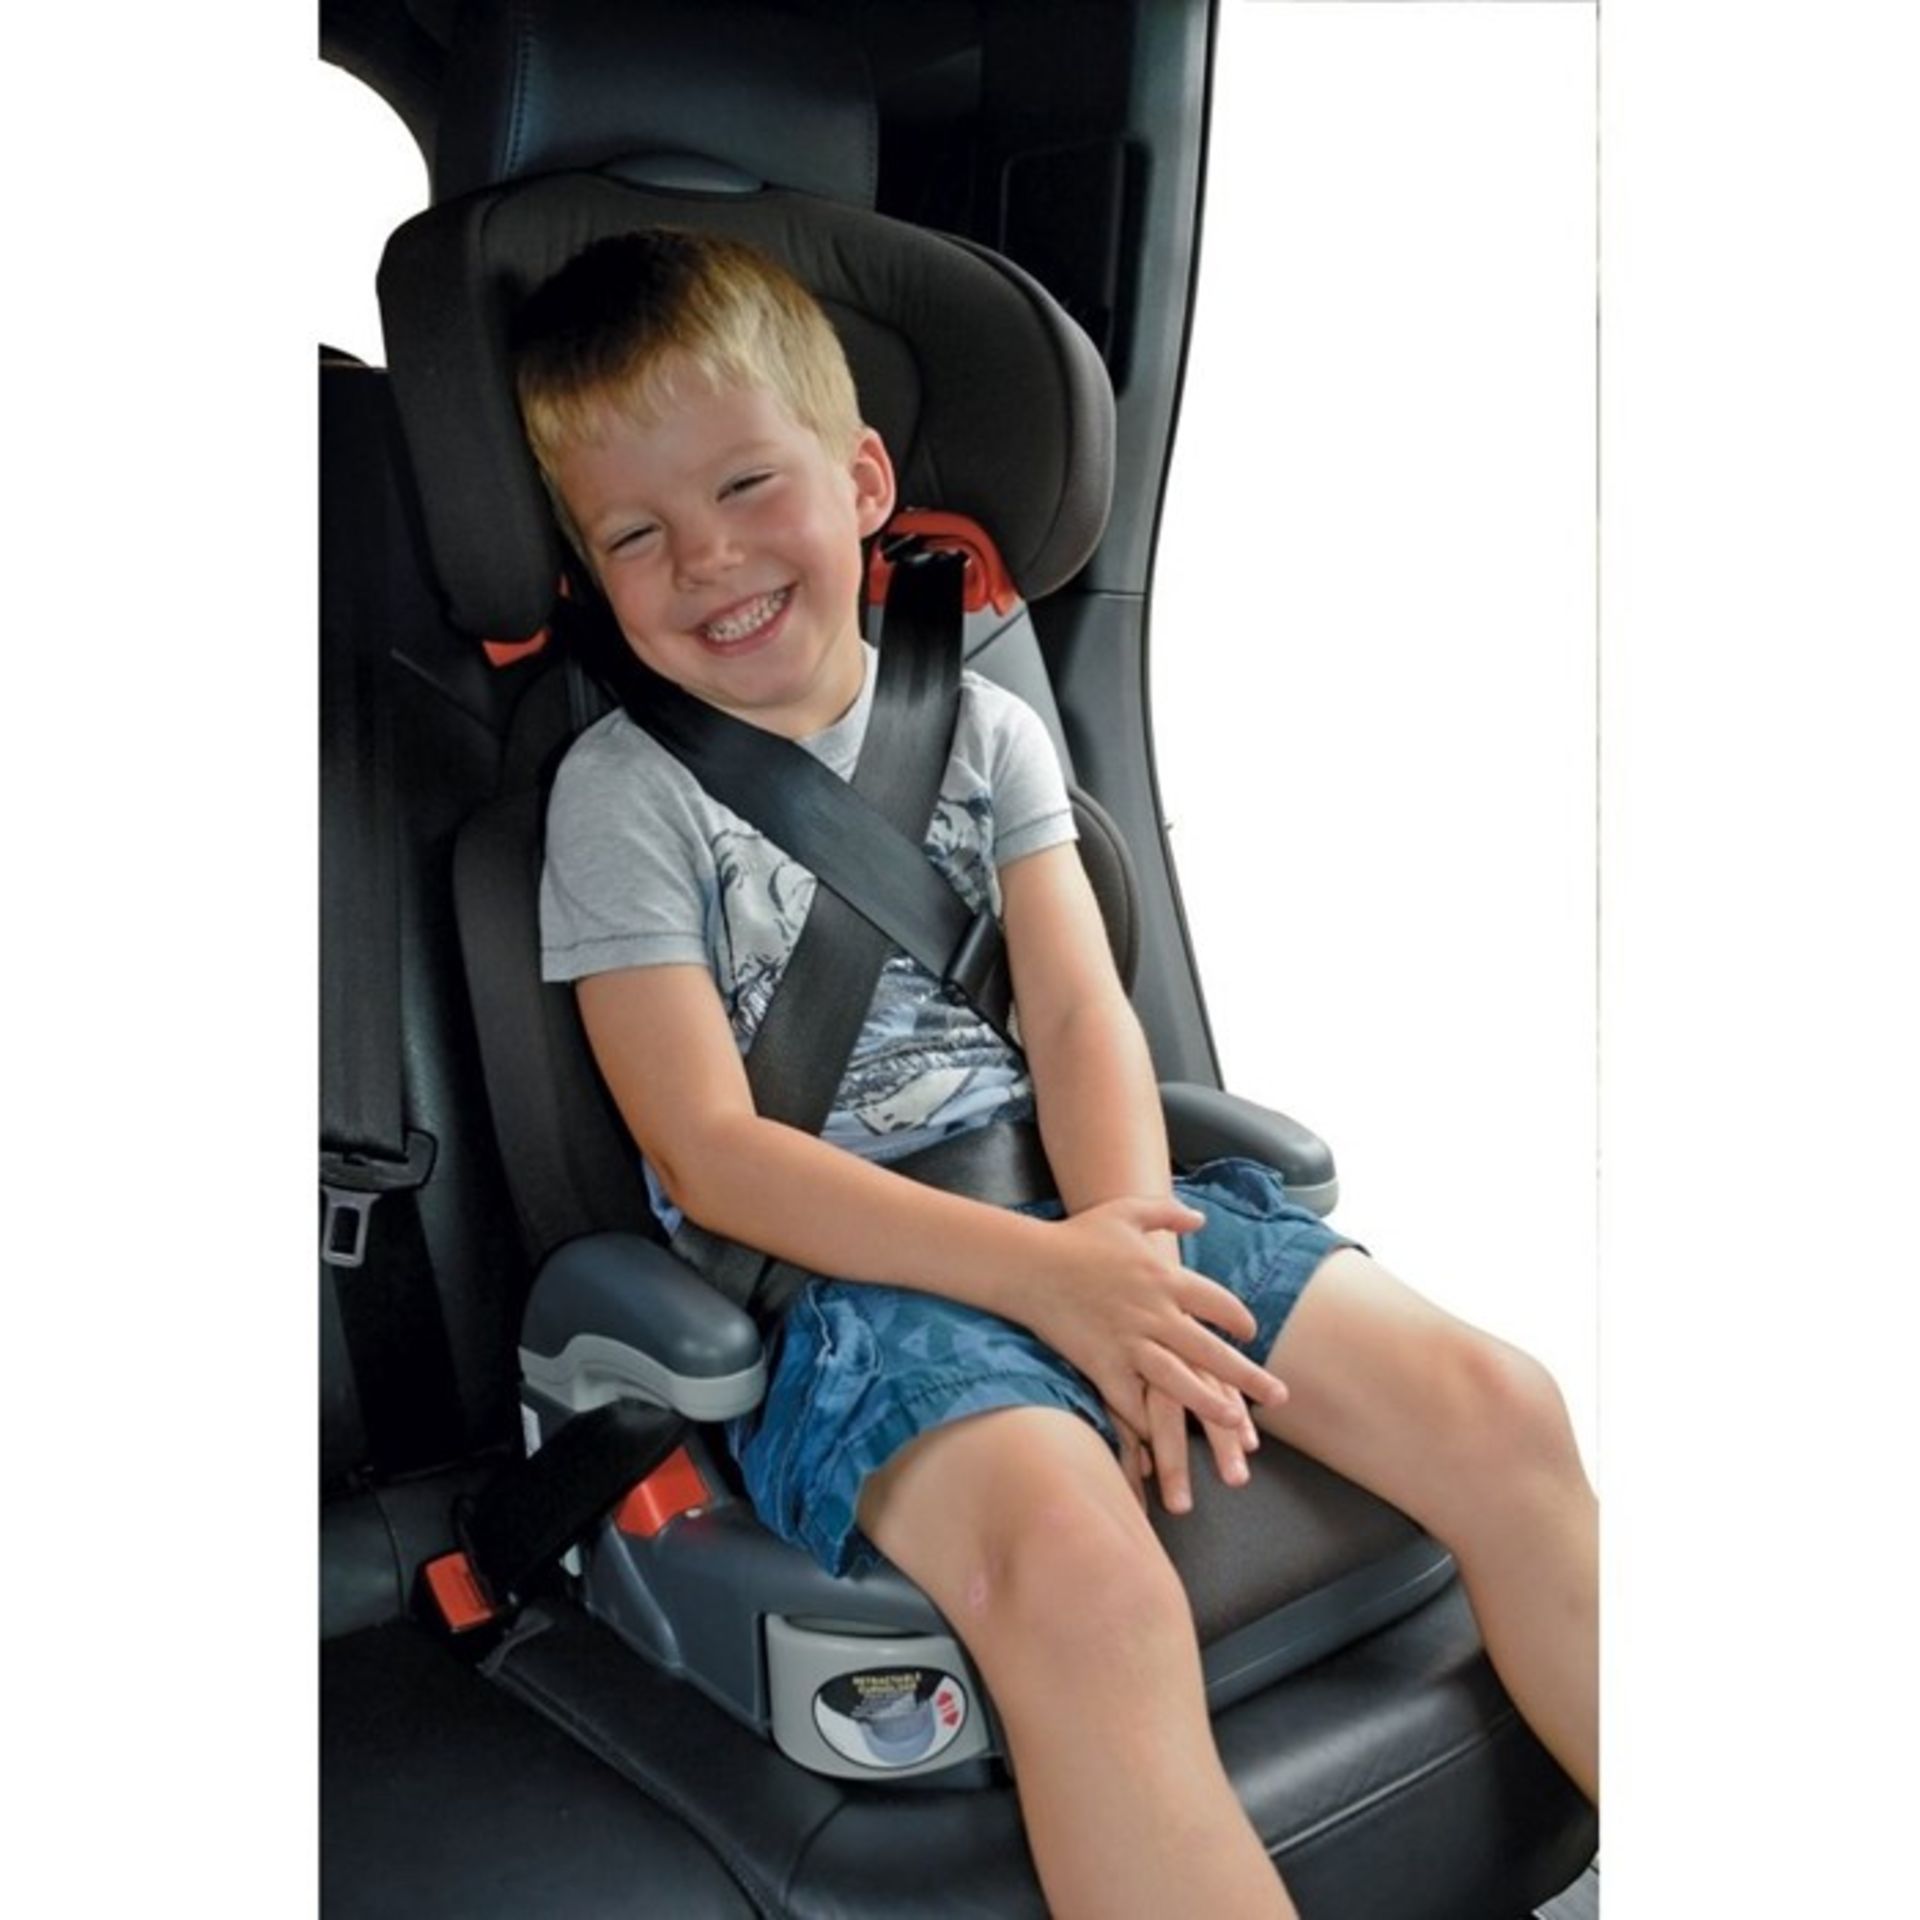 1 AS NEW BOXED BELTUPP CAR SAFETY SUPPORT SEAT BELT / RRP £23.95 (VIEWING HIGHLY RECOMMENDED) - Image 2 of 2